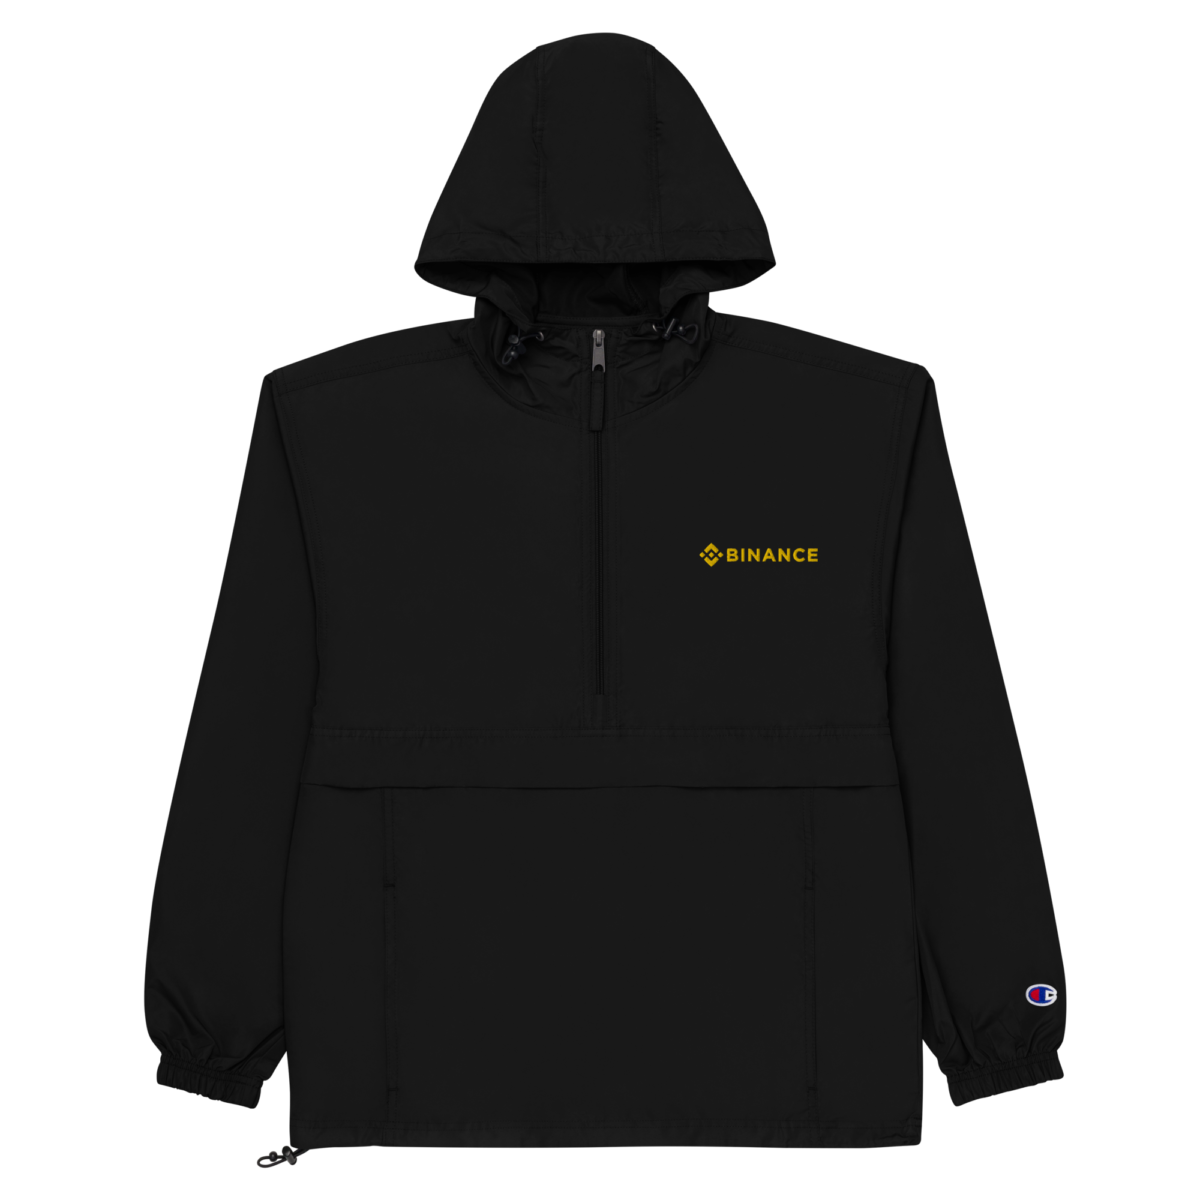 embroidered champion packable jacket black front 631f50ca5e671 - Binance x Champion Packable Jacket